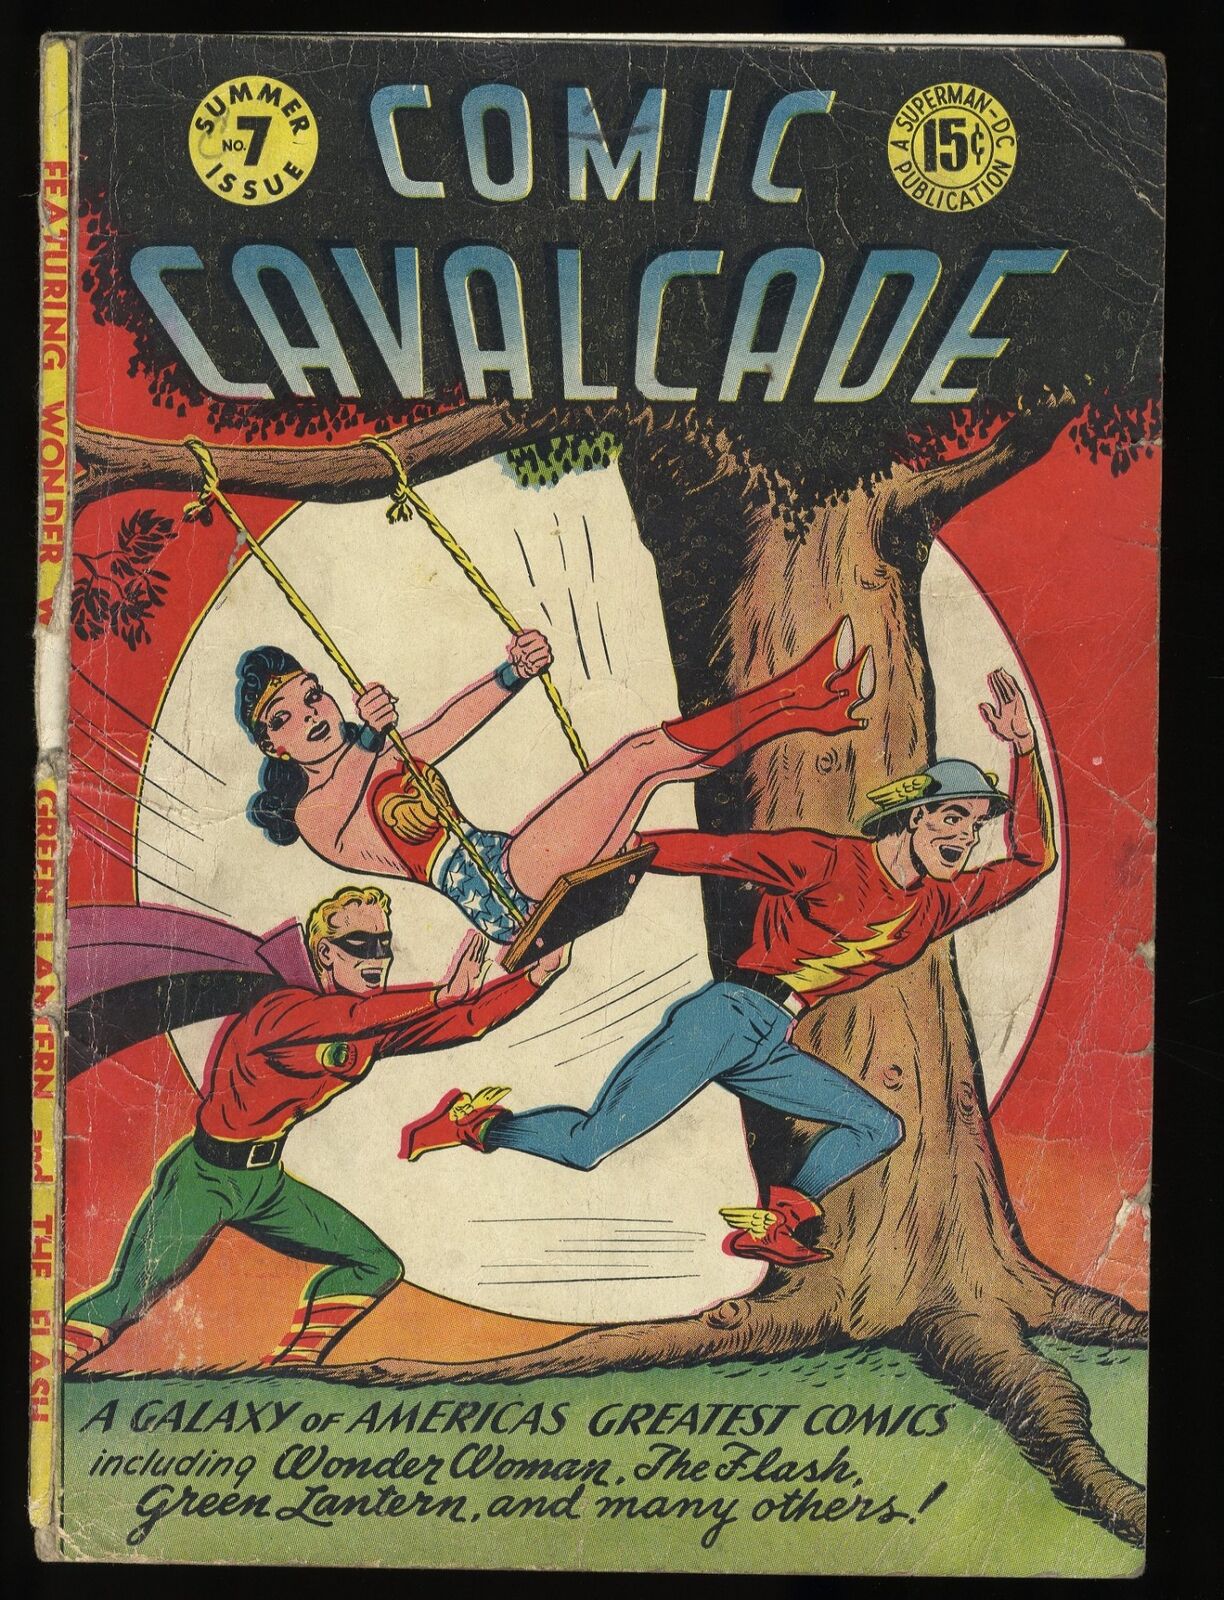 Comic Cavalcade #7 Inc 0.3 Cover Only Cover Art by Frank Harry Wonder Woman